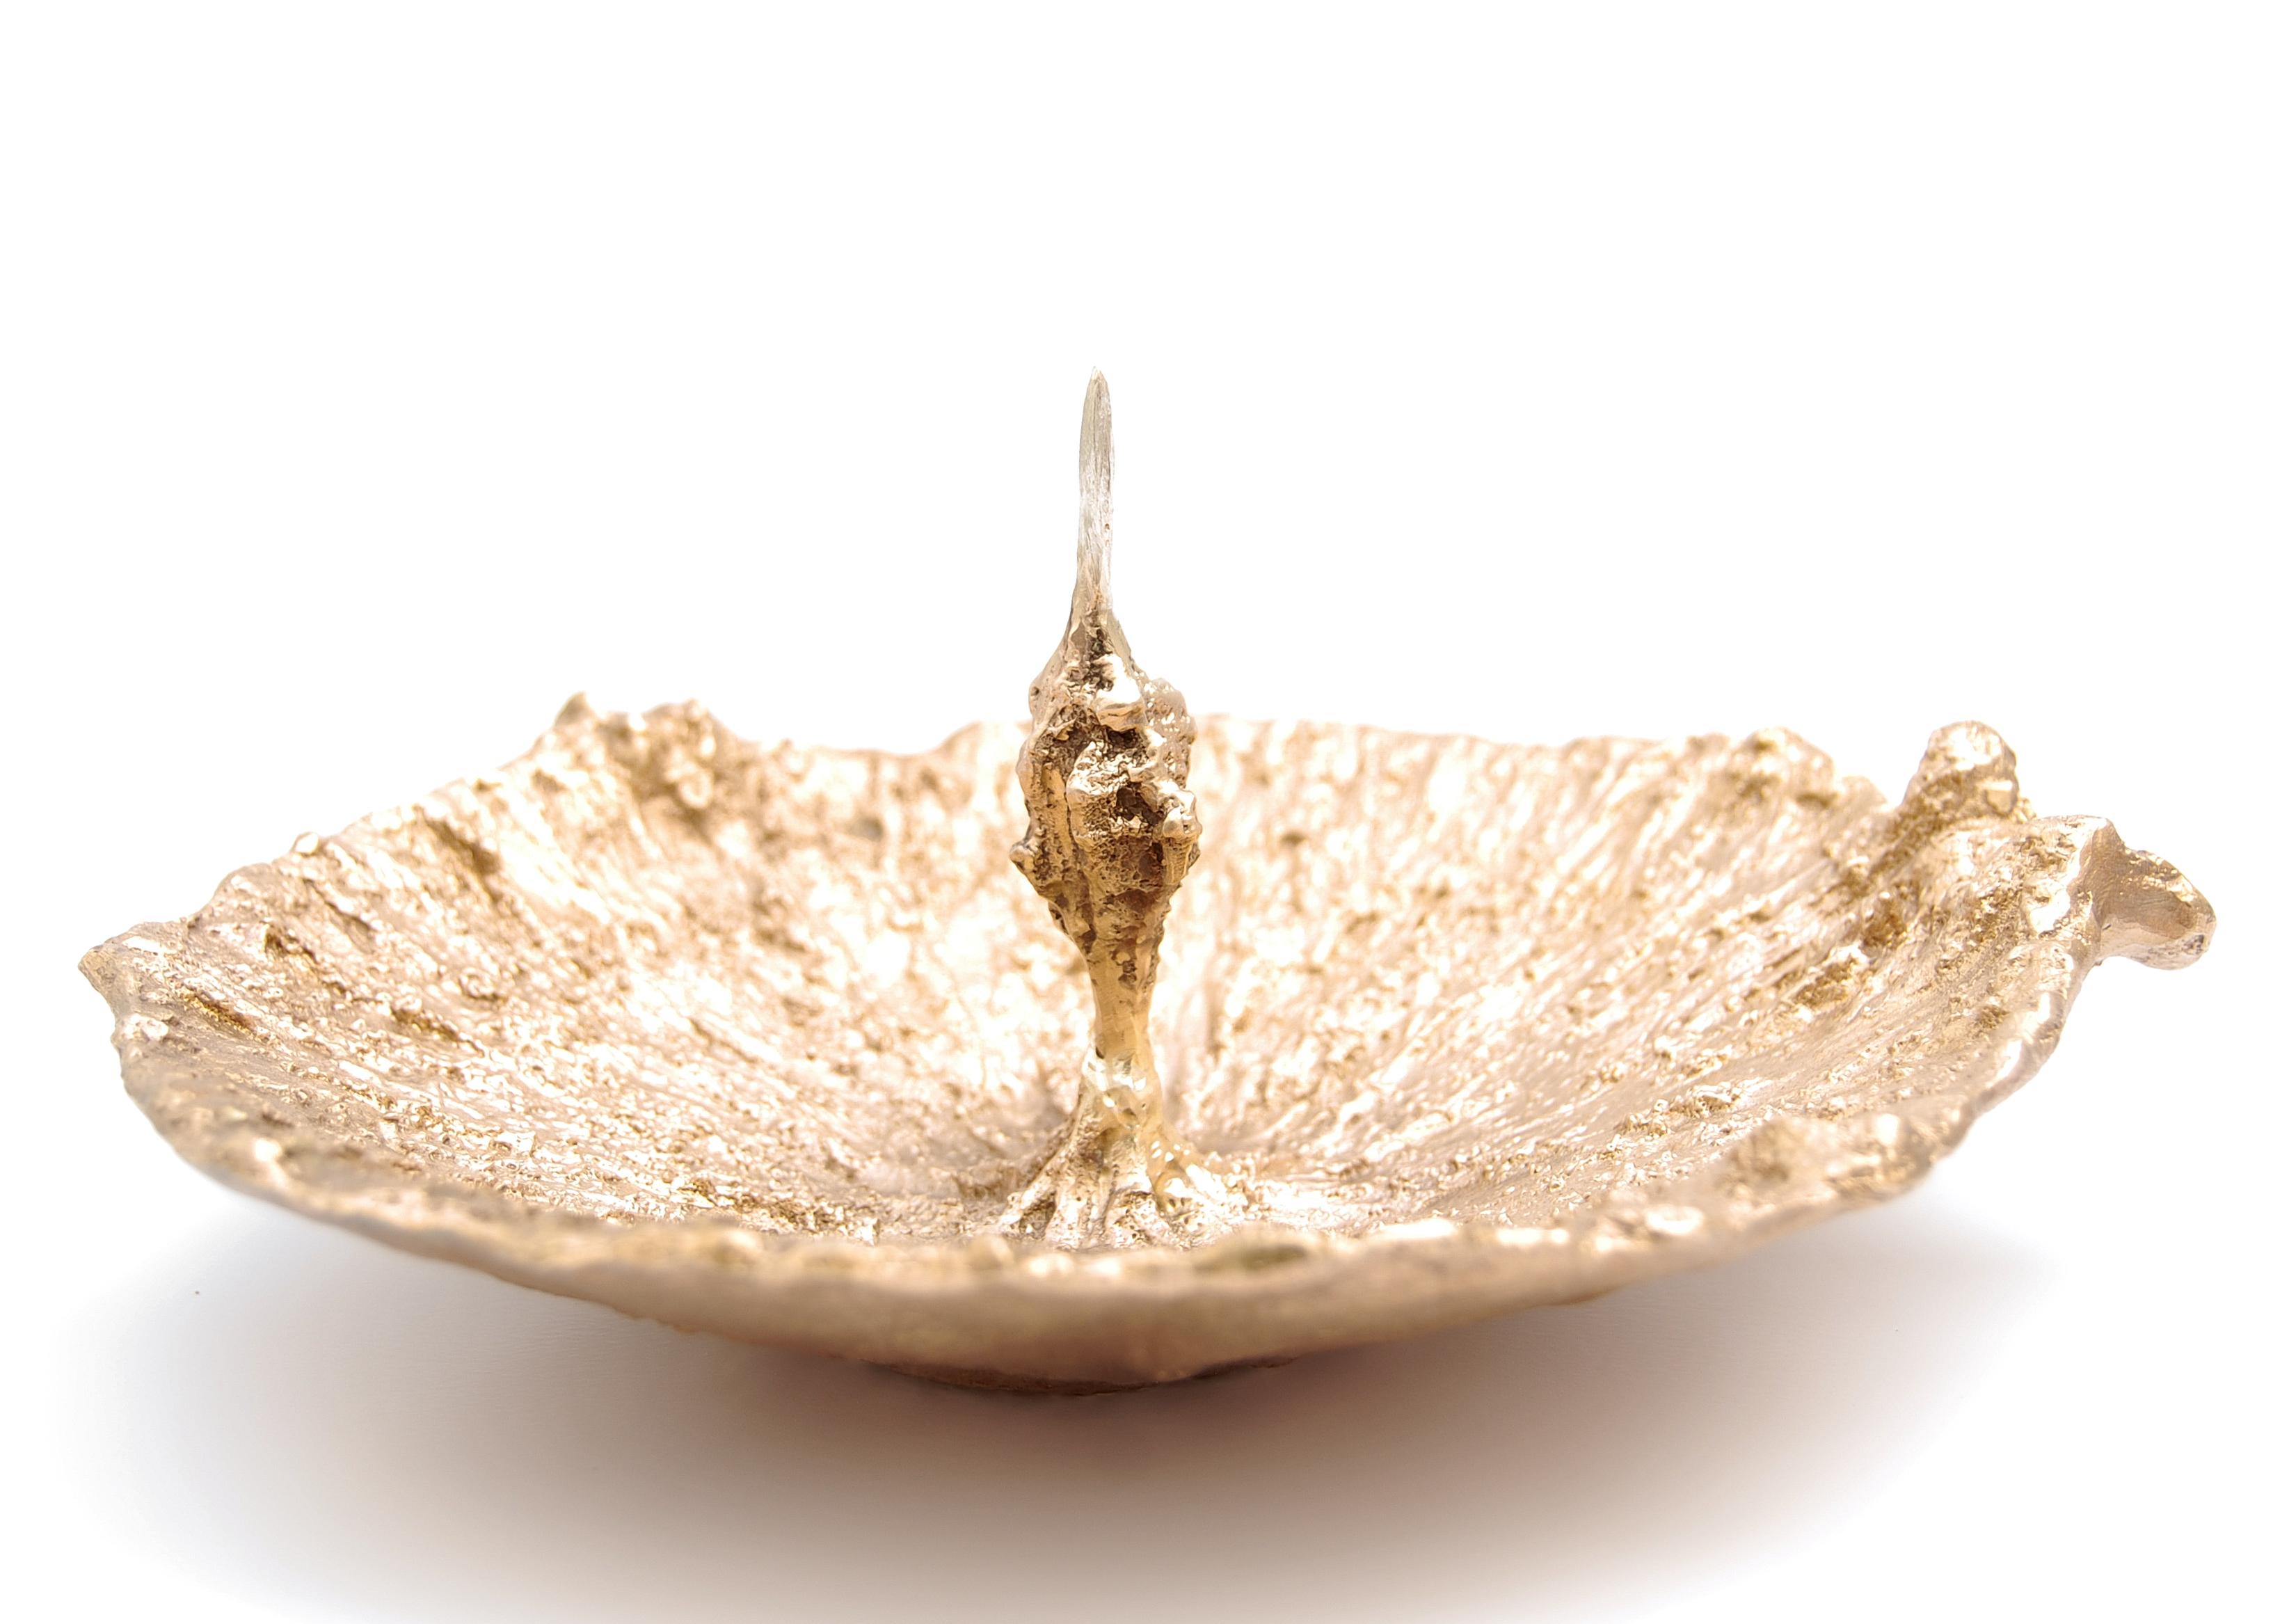 Tomw bowl by Fakasaka Design
Dimensions: W 19 cm D 19 cm H 8.5 cm.
Materials: polished bronze.

TOMW BOWL / ASHTRAY / CENTERPIECE / CANDLEHOLDER

 FAKASAKA is a design company focused on production of high-end furniture, lighting, decorative